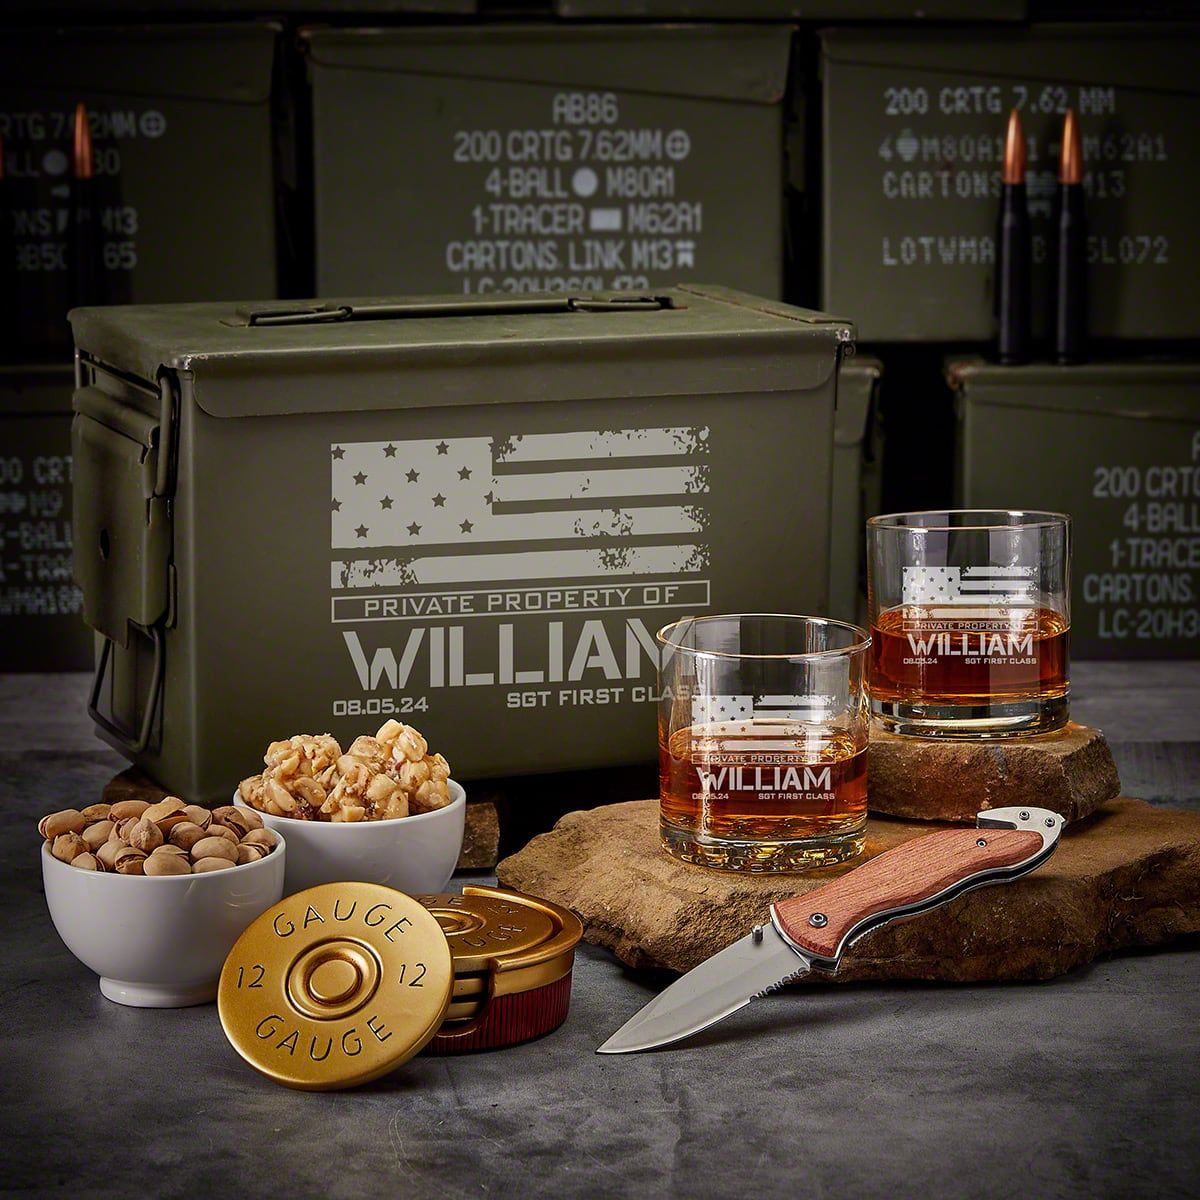 https://images.homewetbar.com/media/catalog/product/a/m/americanheroes-12-gauge-shotgun-shell-coaster-ammo-can-set-with-knife-p_10744.jpg?store=default&image-type=image